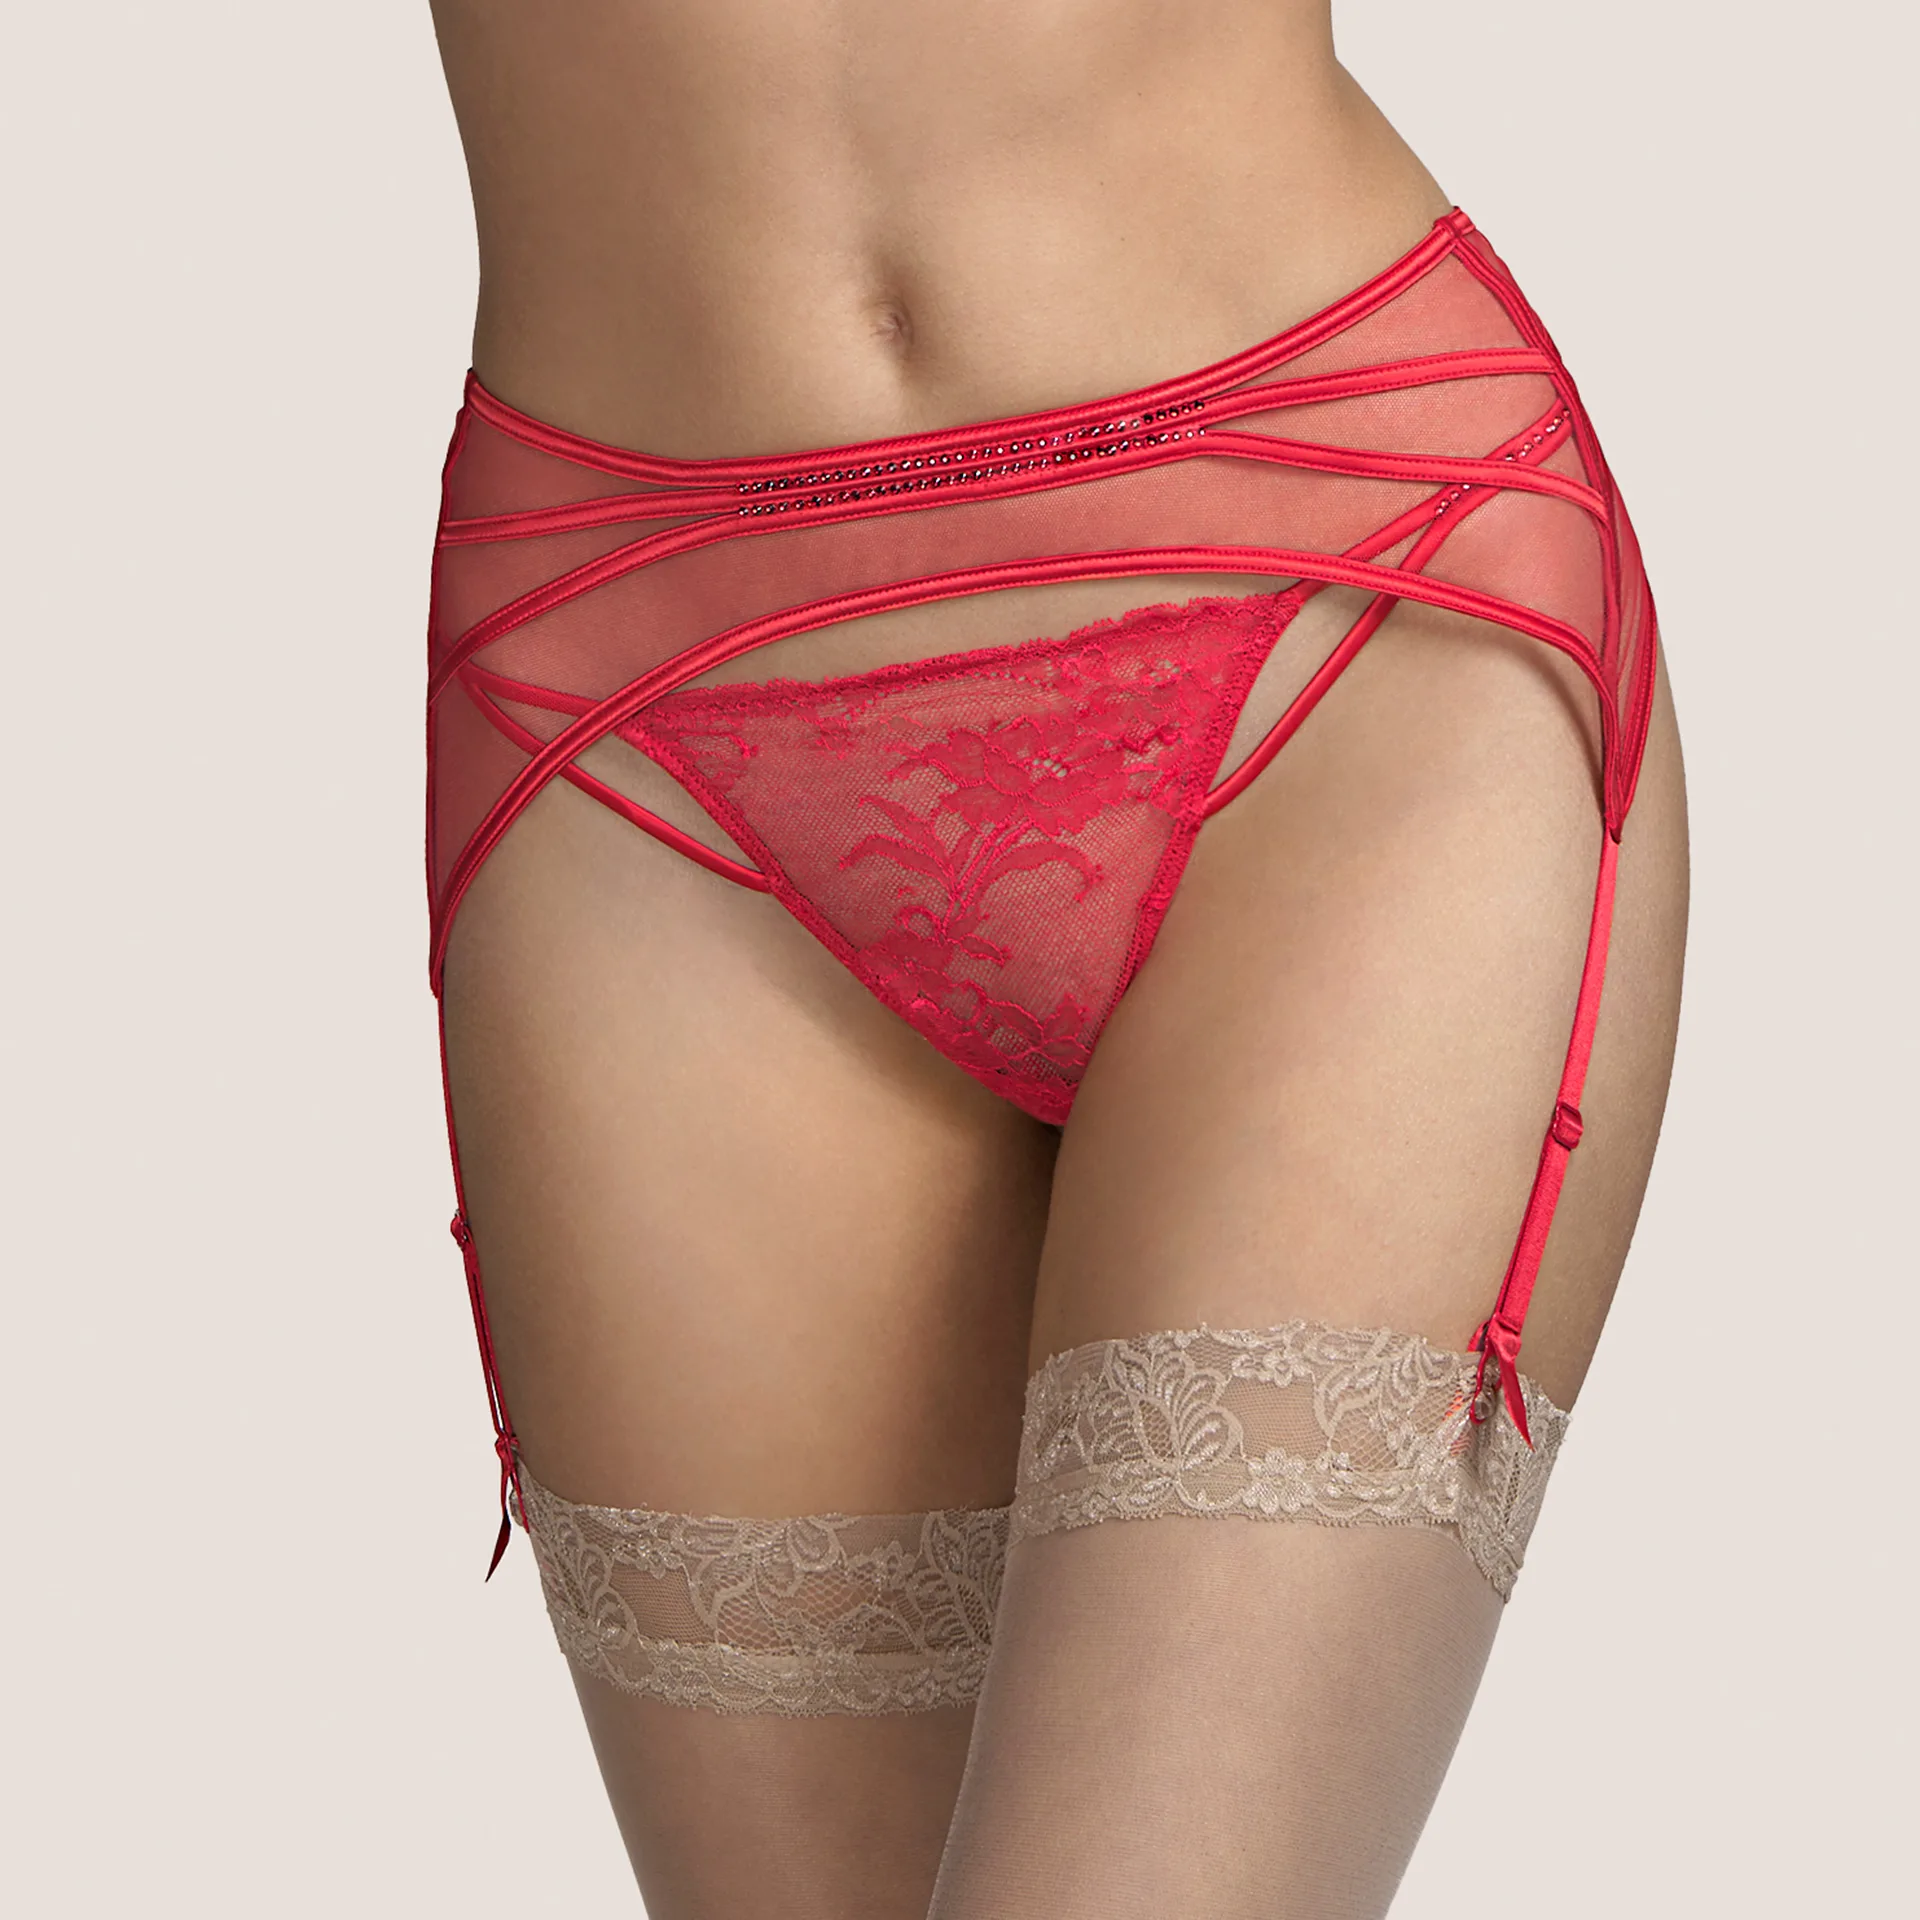 Intimo Lingerie - We have a Shapewear solution for every occasion